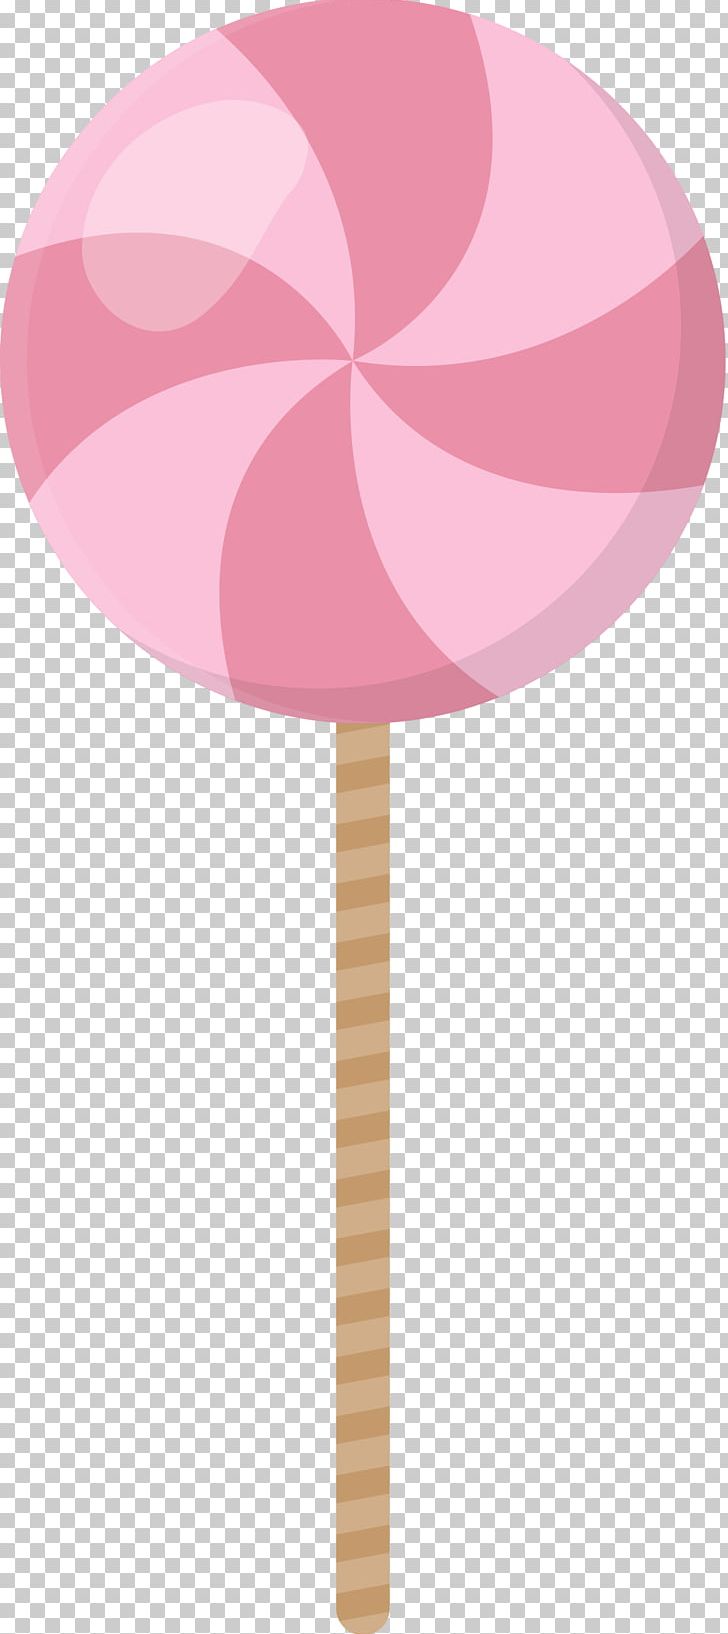 Candy Crush Saga Lollipop Icon PNG, Clipart, Android, Candies, Candy, Candy Border, Candy Cane Free PNG Download